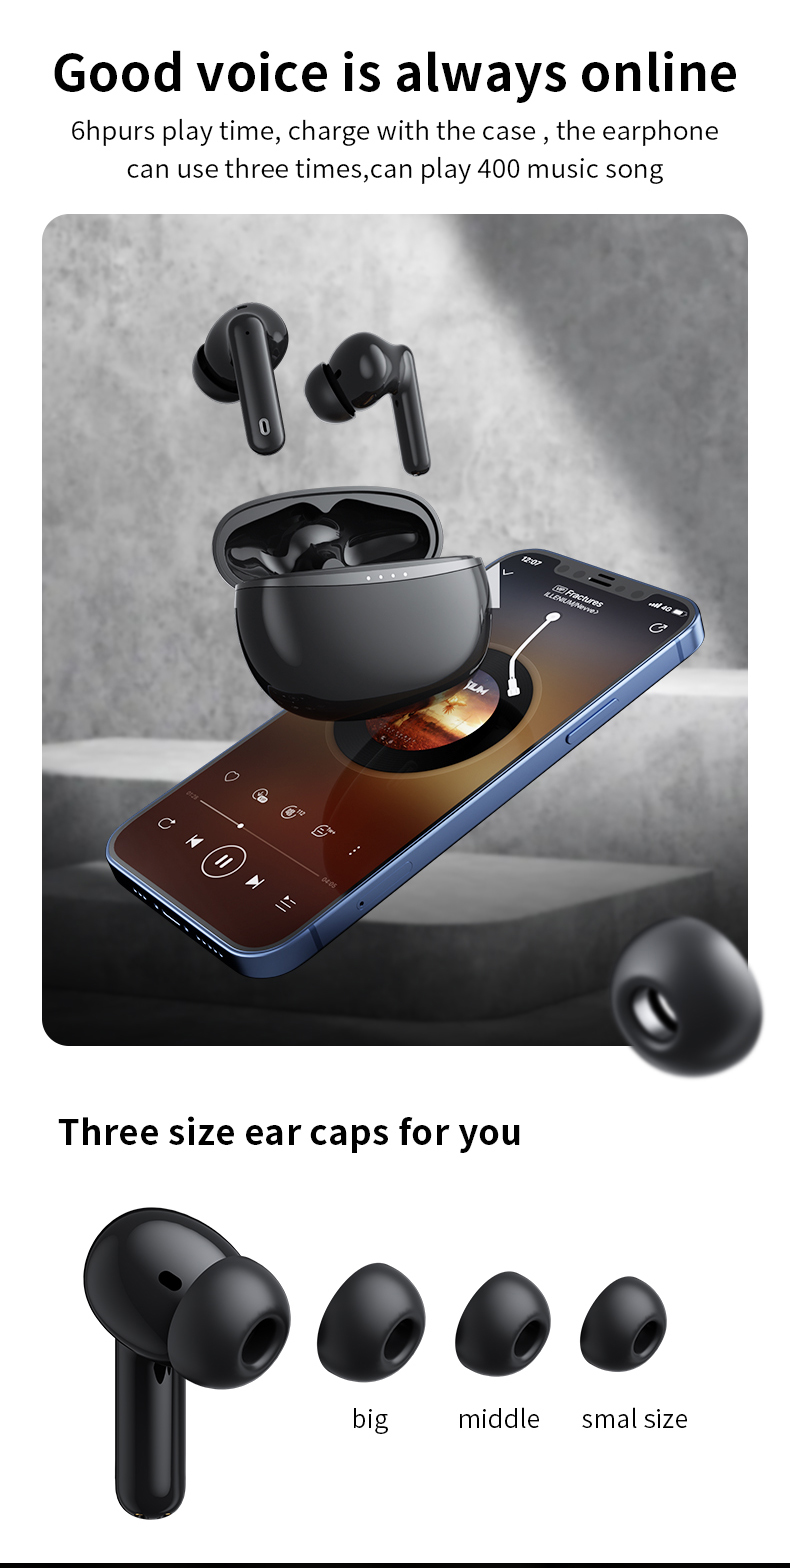 Black A50 pro ANC ENC Active Noise-canceling Gaming Earphones with Dual Microphones and Low Latency Headset made by Manufacturer Enle